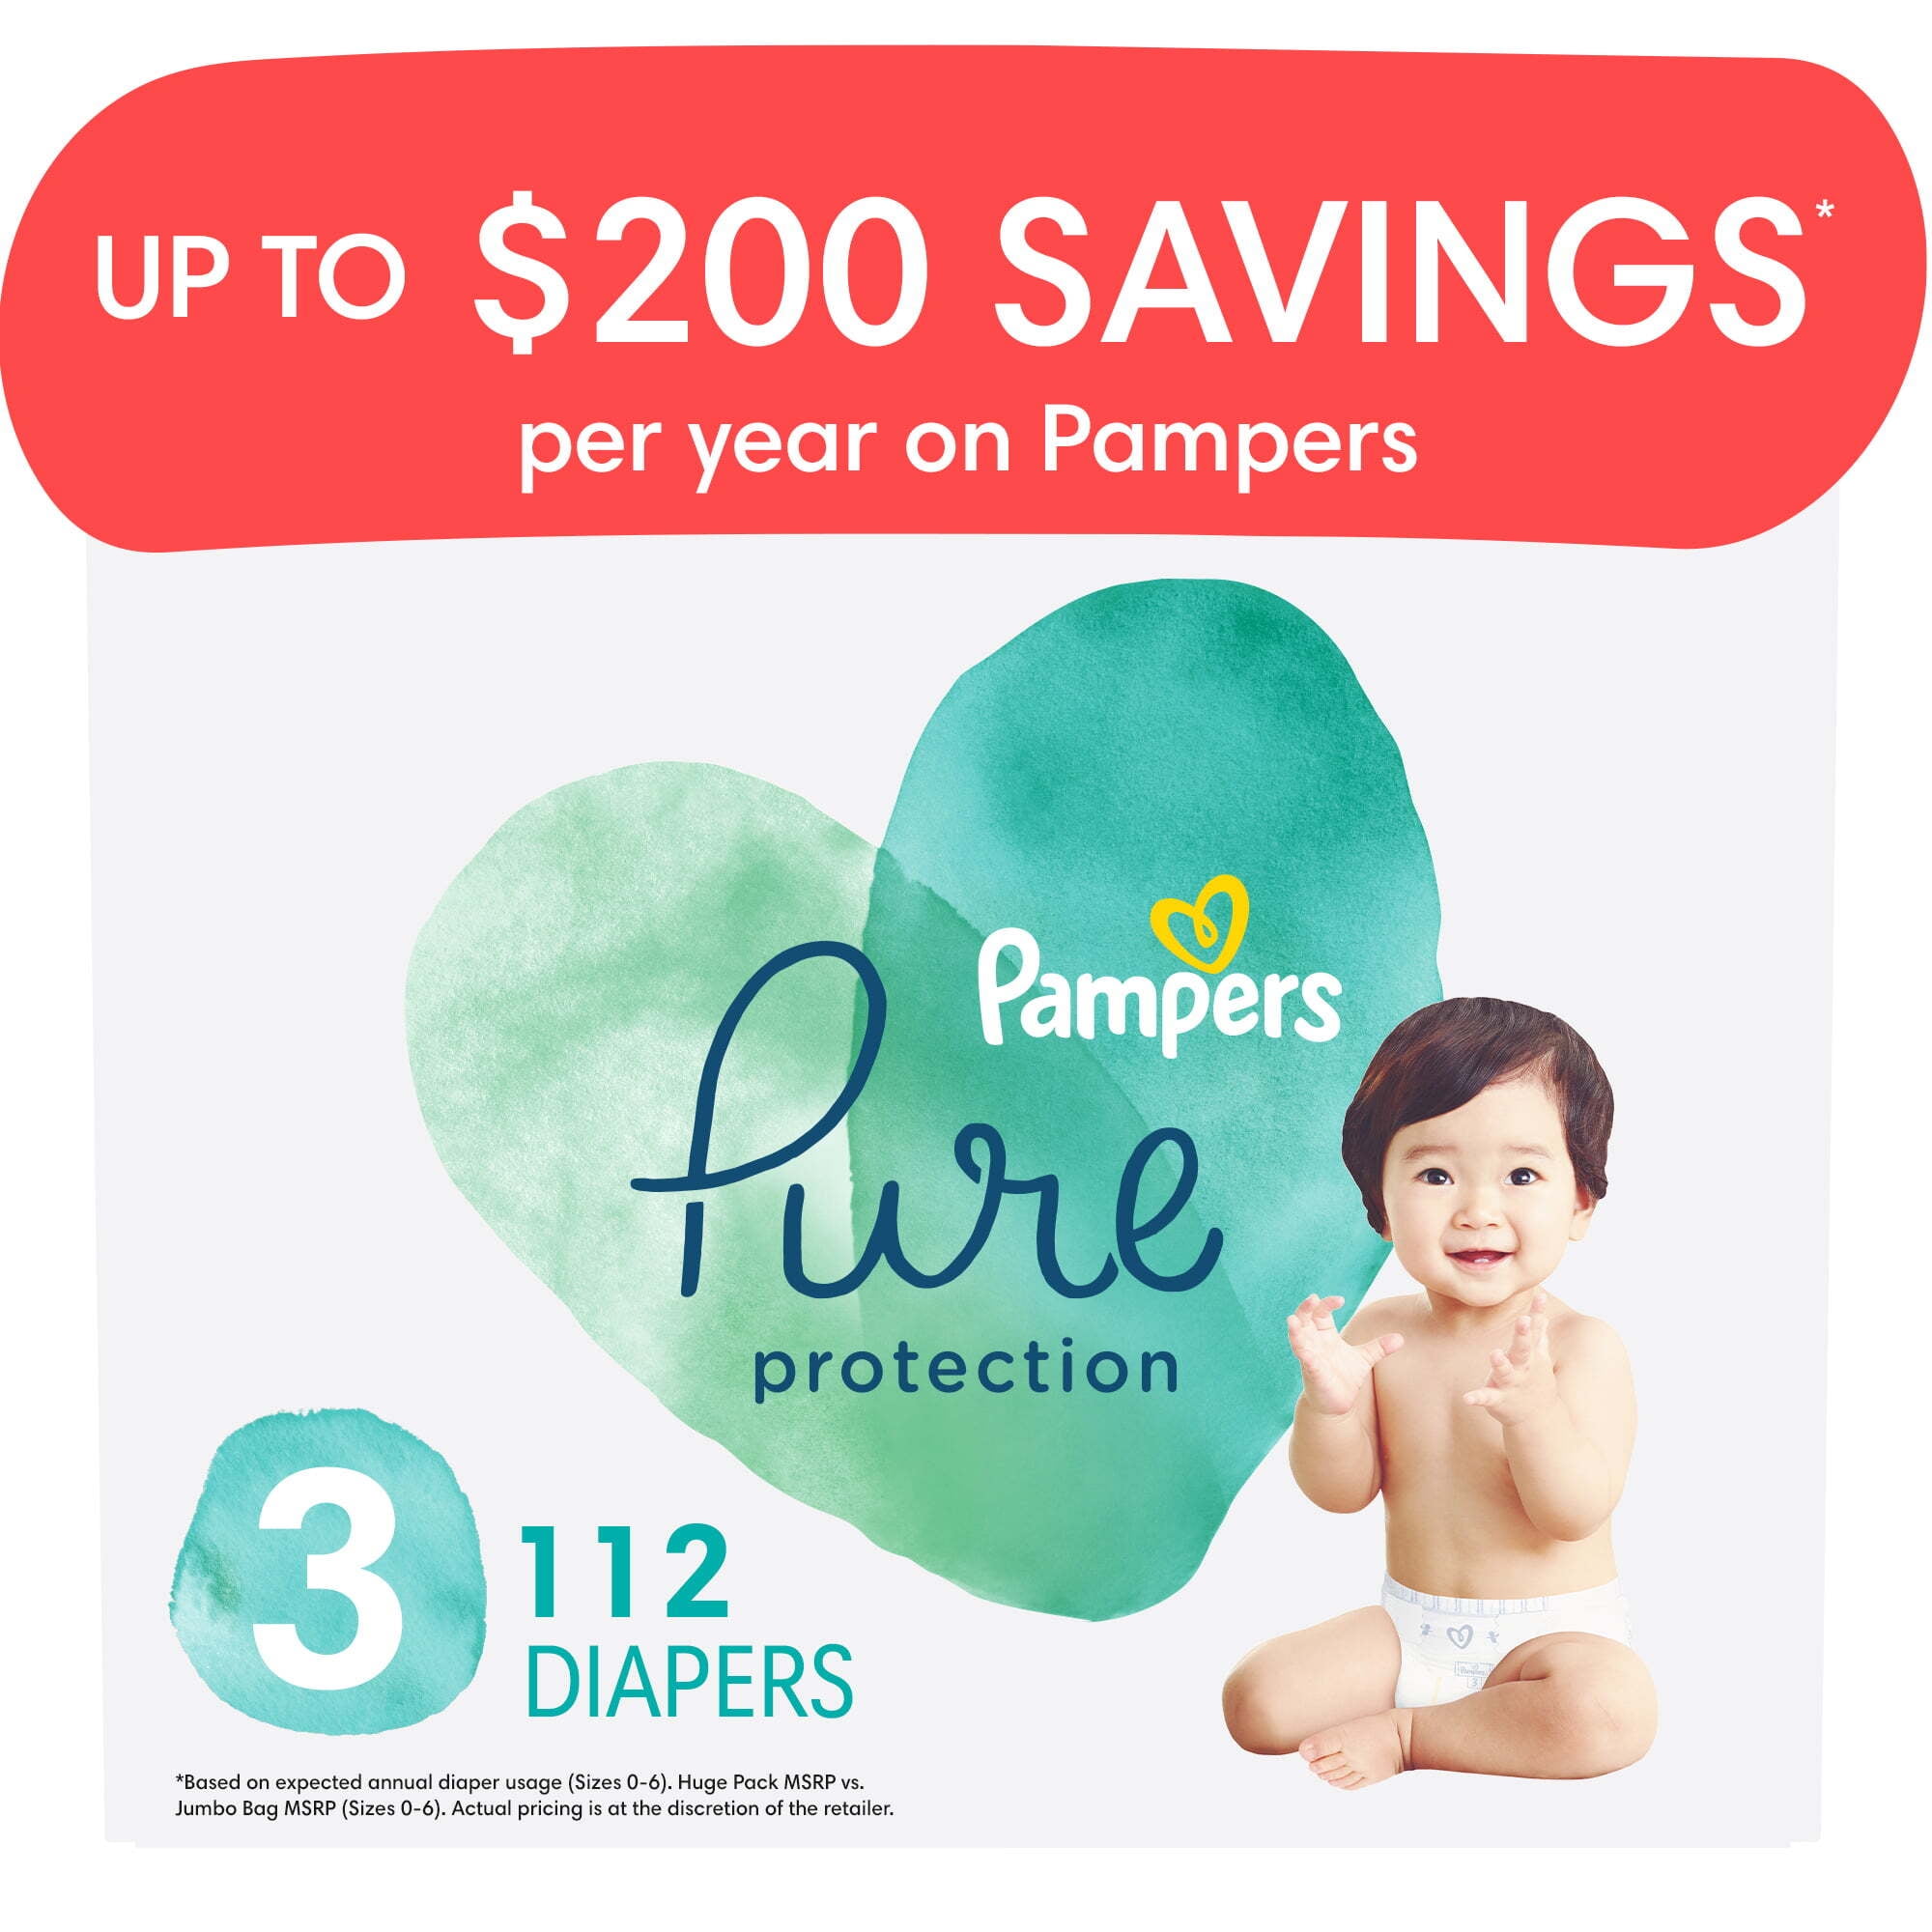 Pampers Pure Protection Size 3 Diapers 124 ct Box 